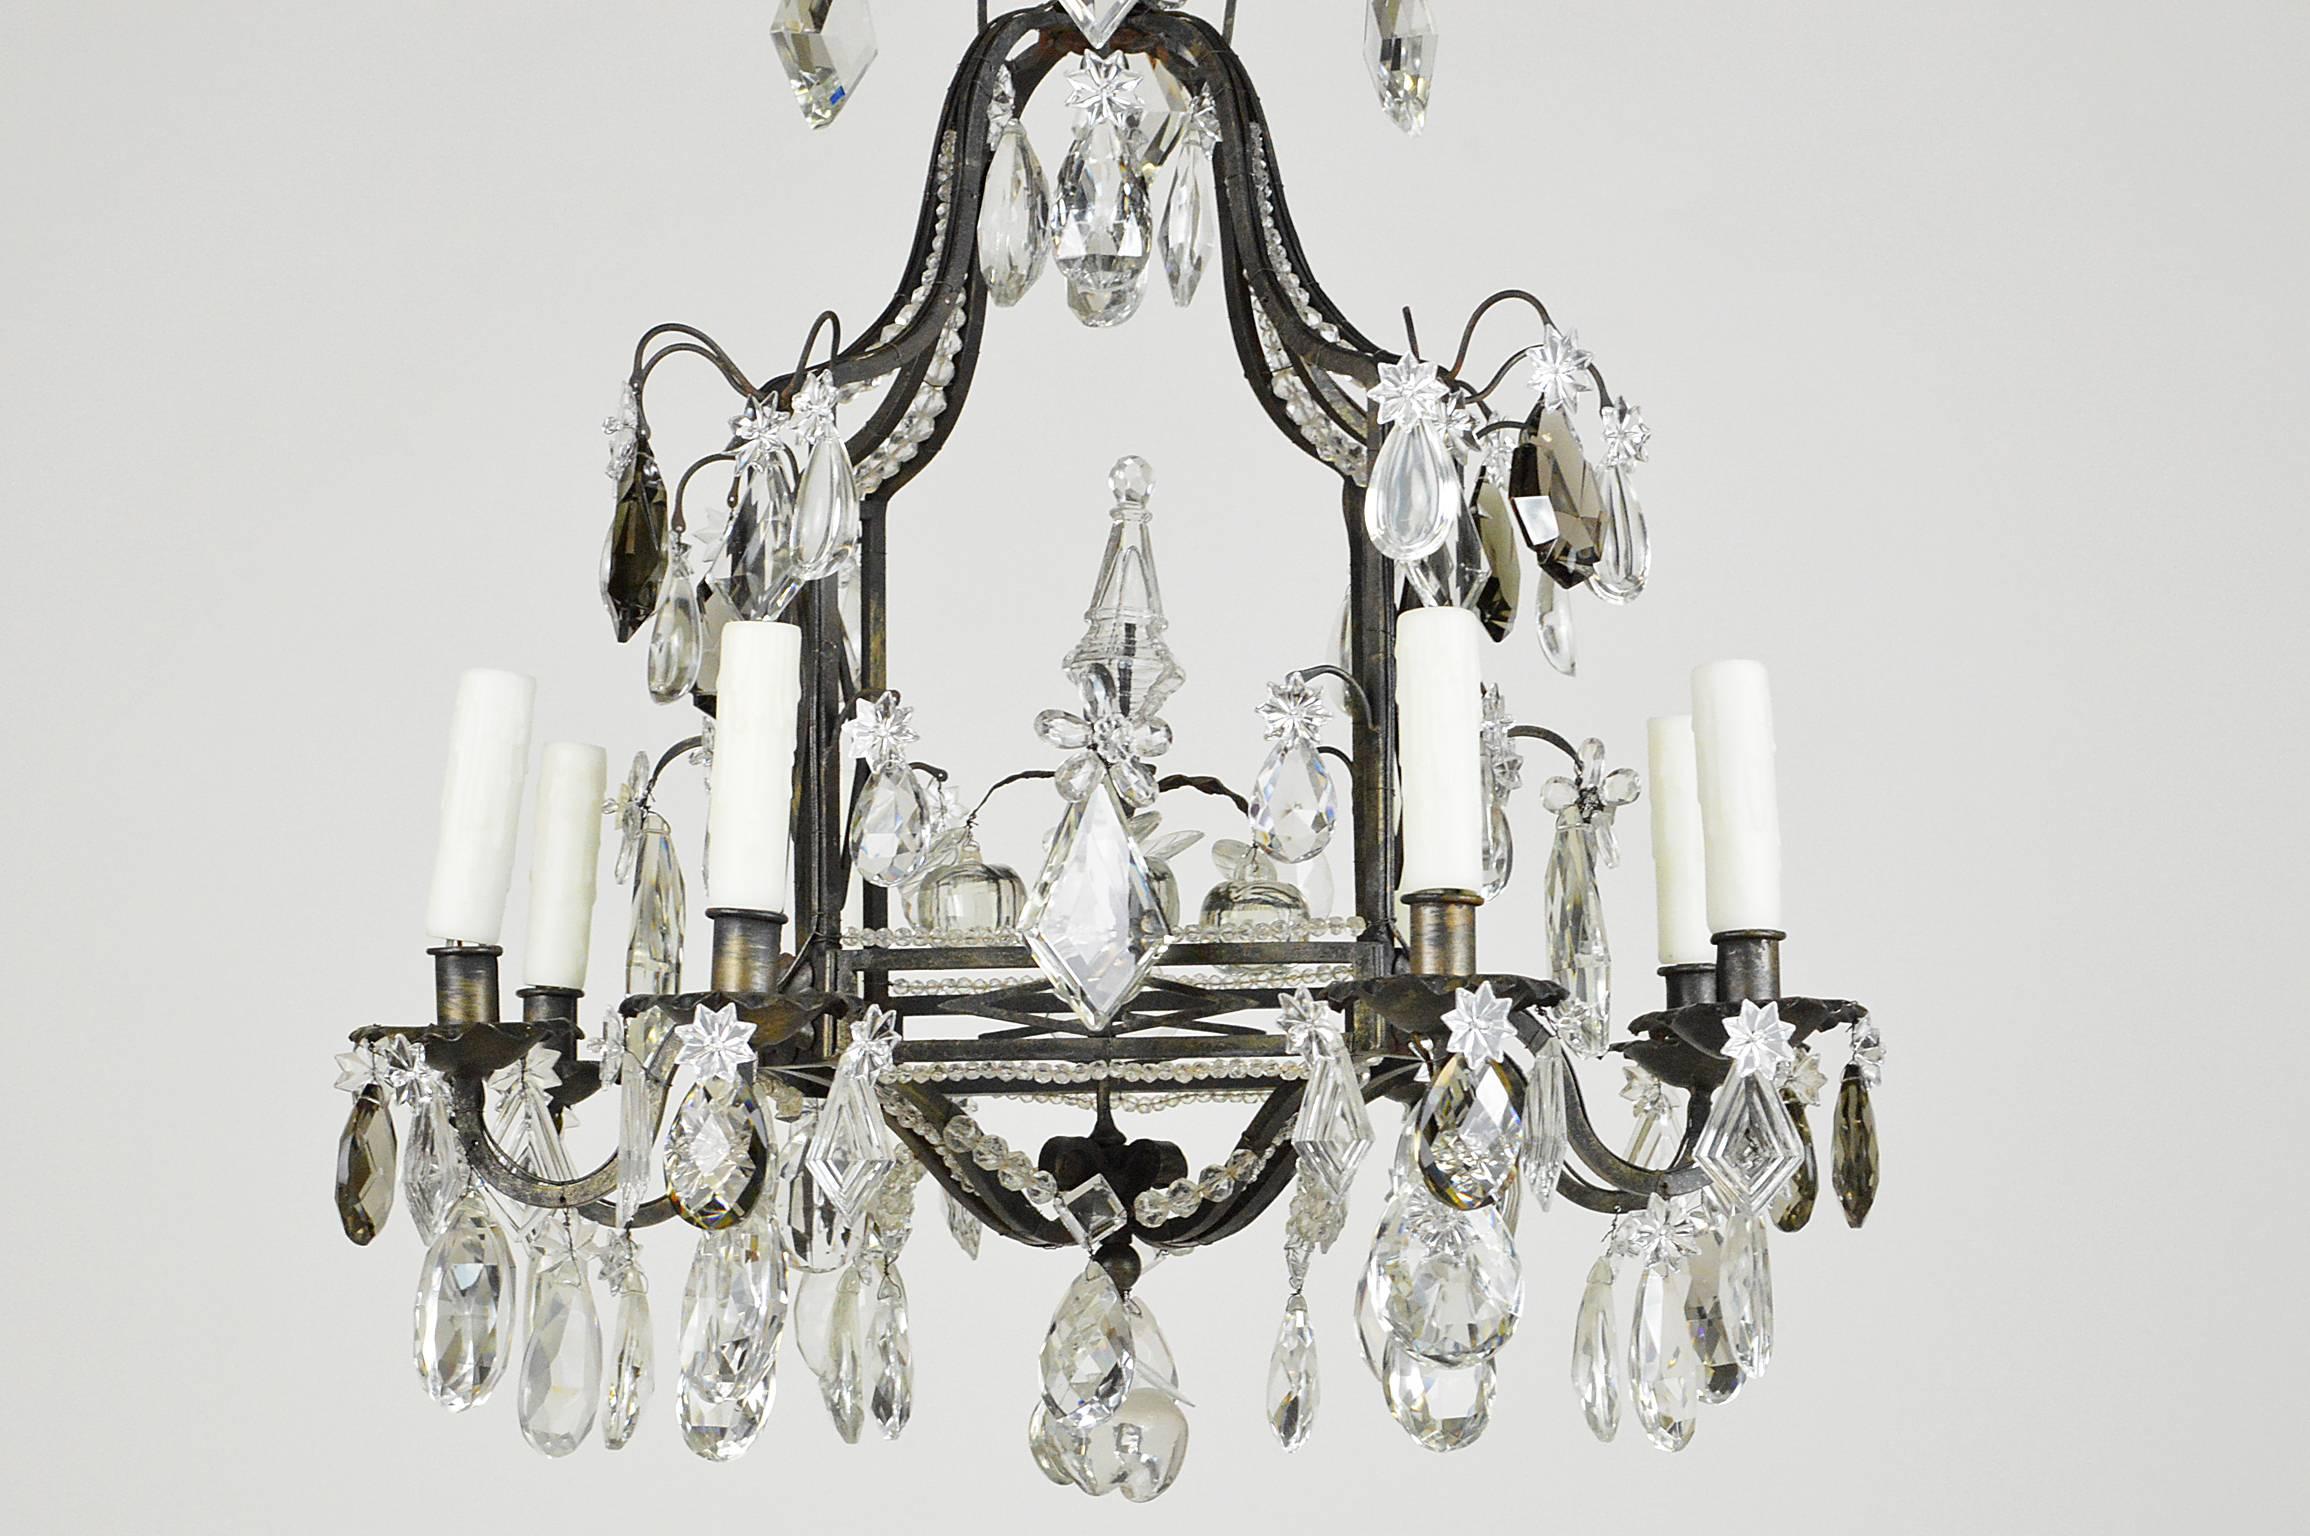 Fine French iron and crystal eight-light cage form chandelier having beaded decoration throughout the frame with colored and clear crystals throughout. This fixture is of the finest quality. Cleaned and recently rewired.